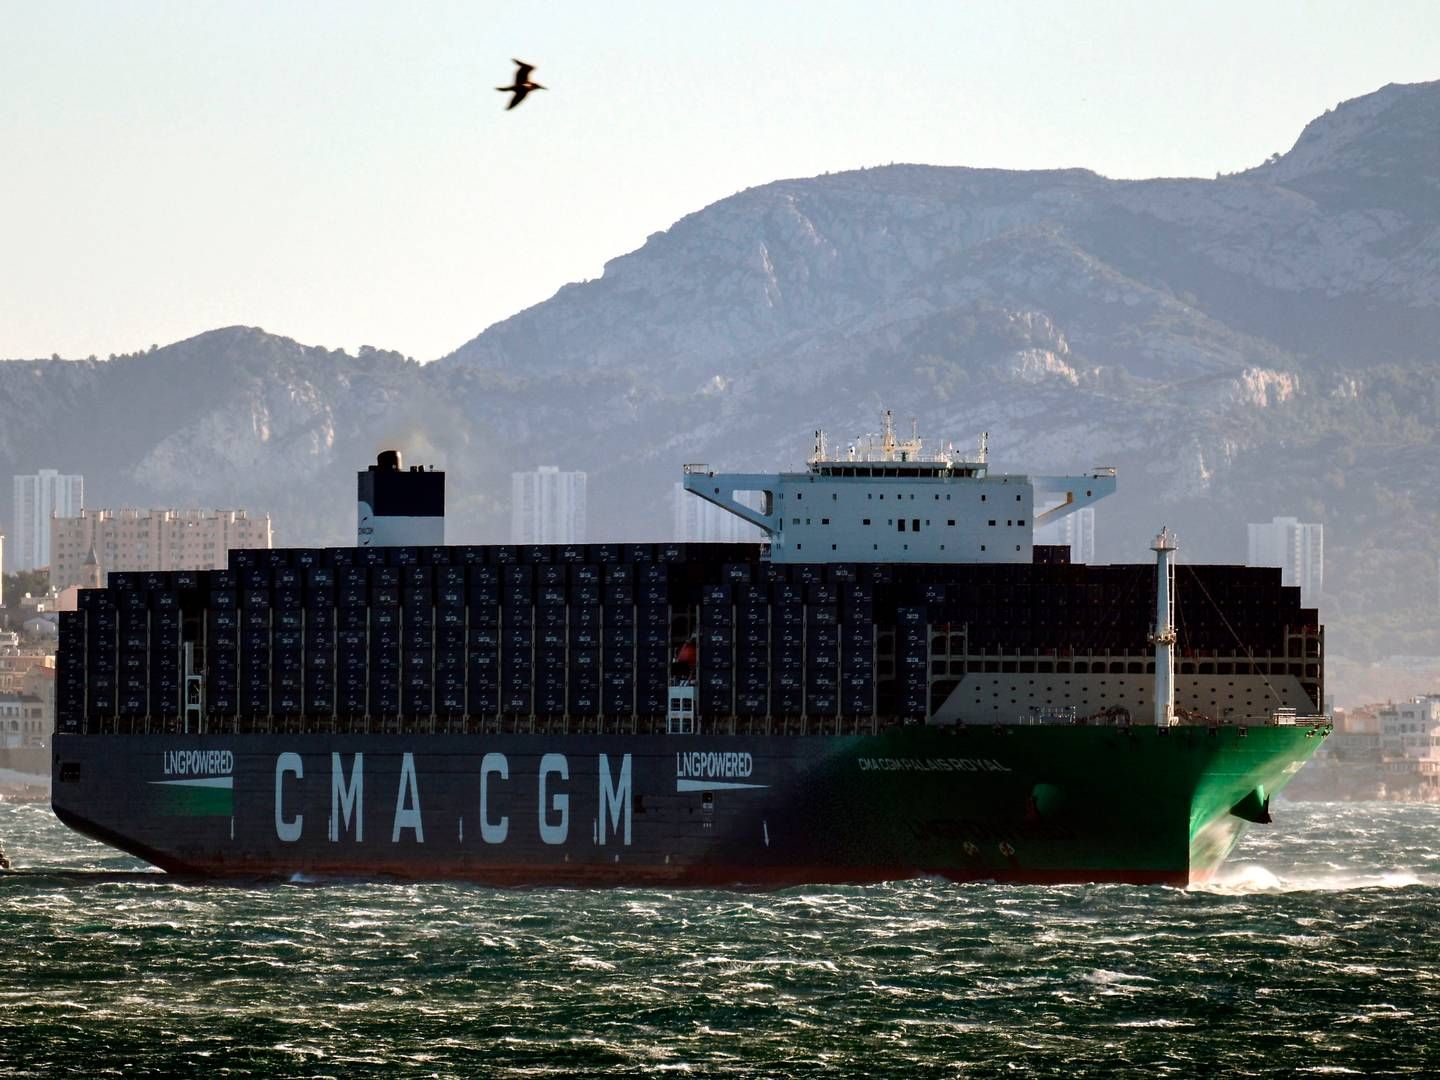 CMA CGM, among others, has recently raised prices for freight between Asia and Europe. | Photo: Christophe Simon/AFP/Ritzau Scanpix